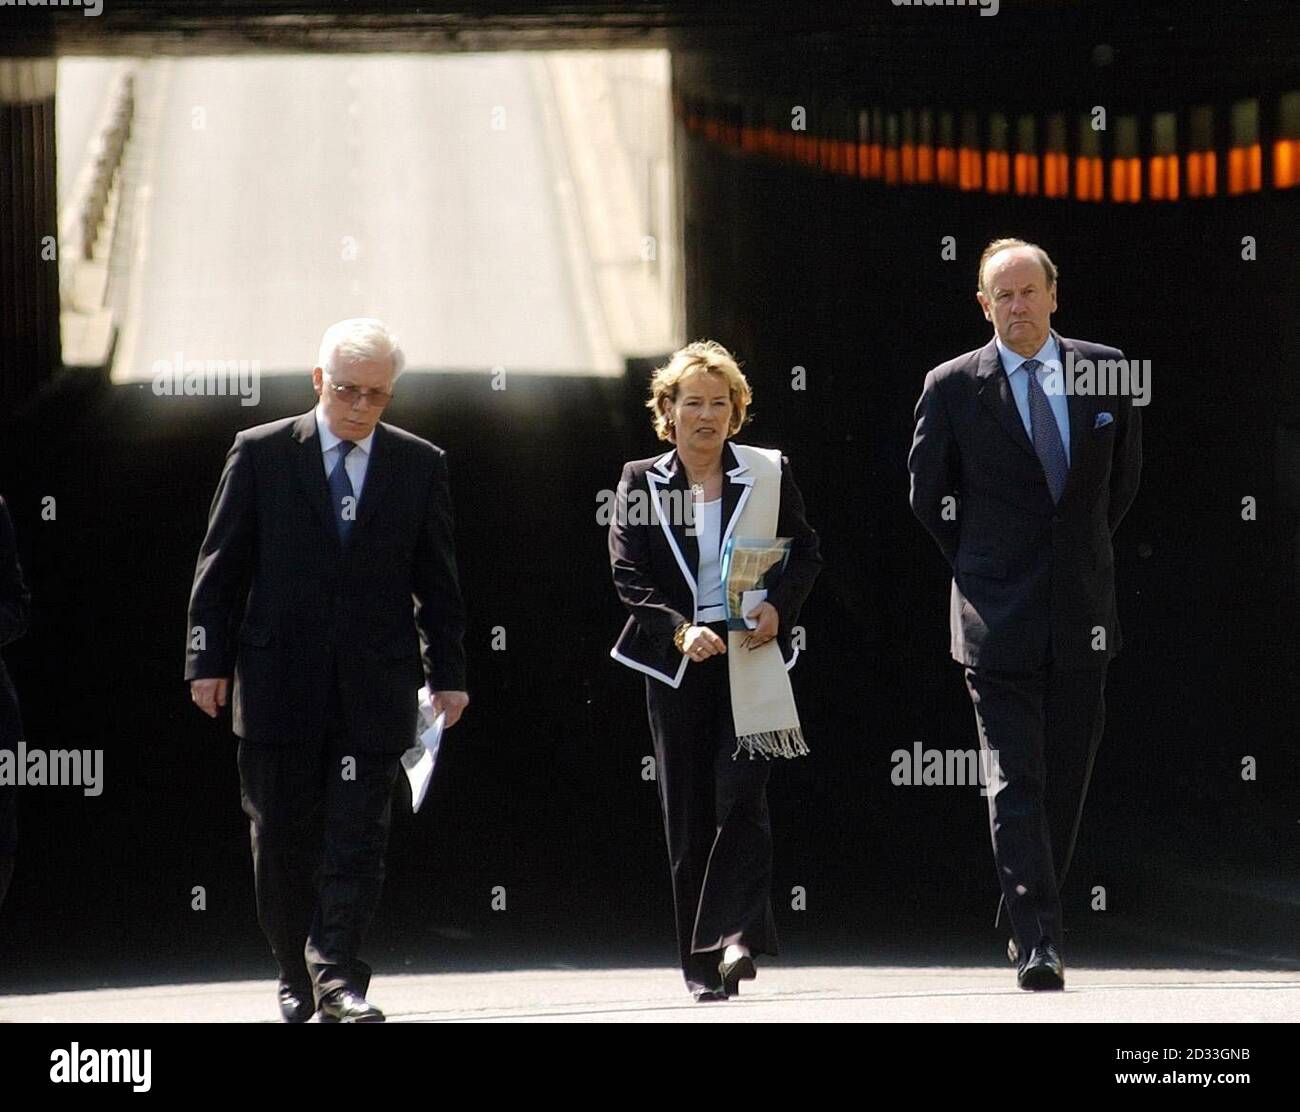 (from left-right) Royal Corroner Michael Burgess with French police chief Madame Martine Monteil and Metropolitan Police Commissioner Sir John Stevens walking through the road tunnel near Pont de l'Alma, in which Diana, the Princess of Wales, and Dodi Fayed died in a car crash seven years ago. Sir John said so far he had only been looking at general information such as videos and photographs. Stock Photo